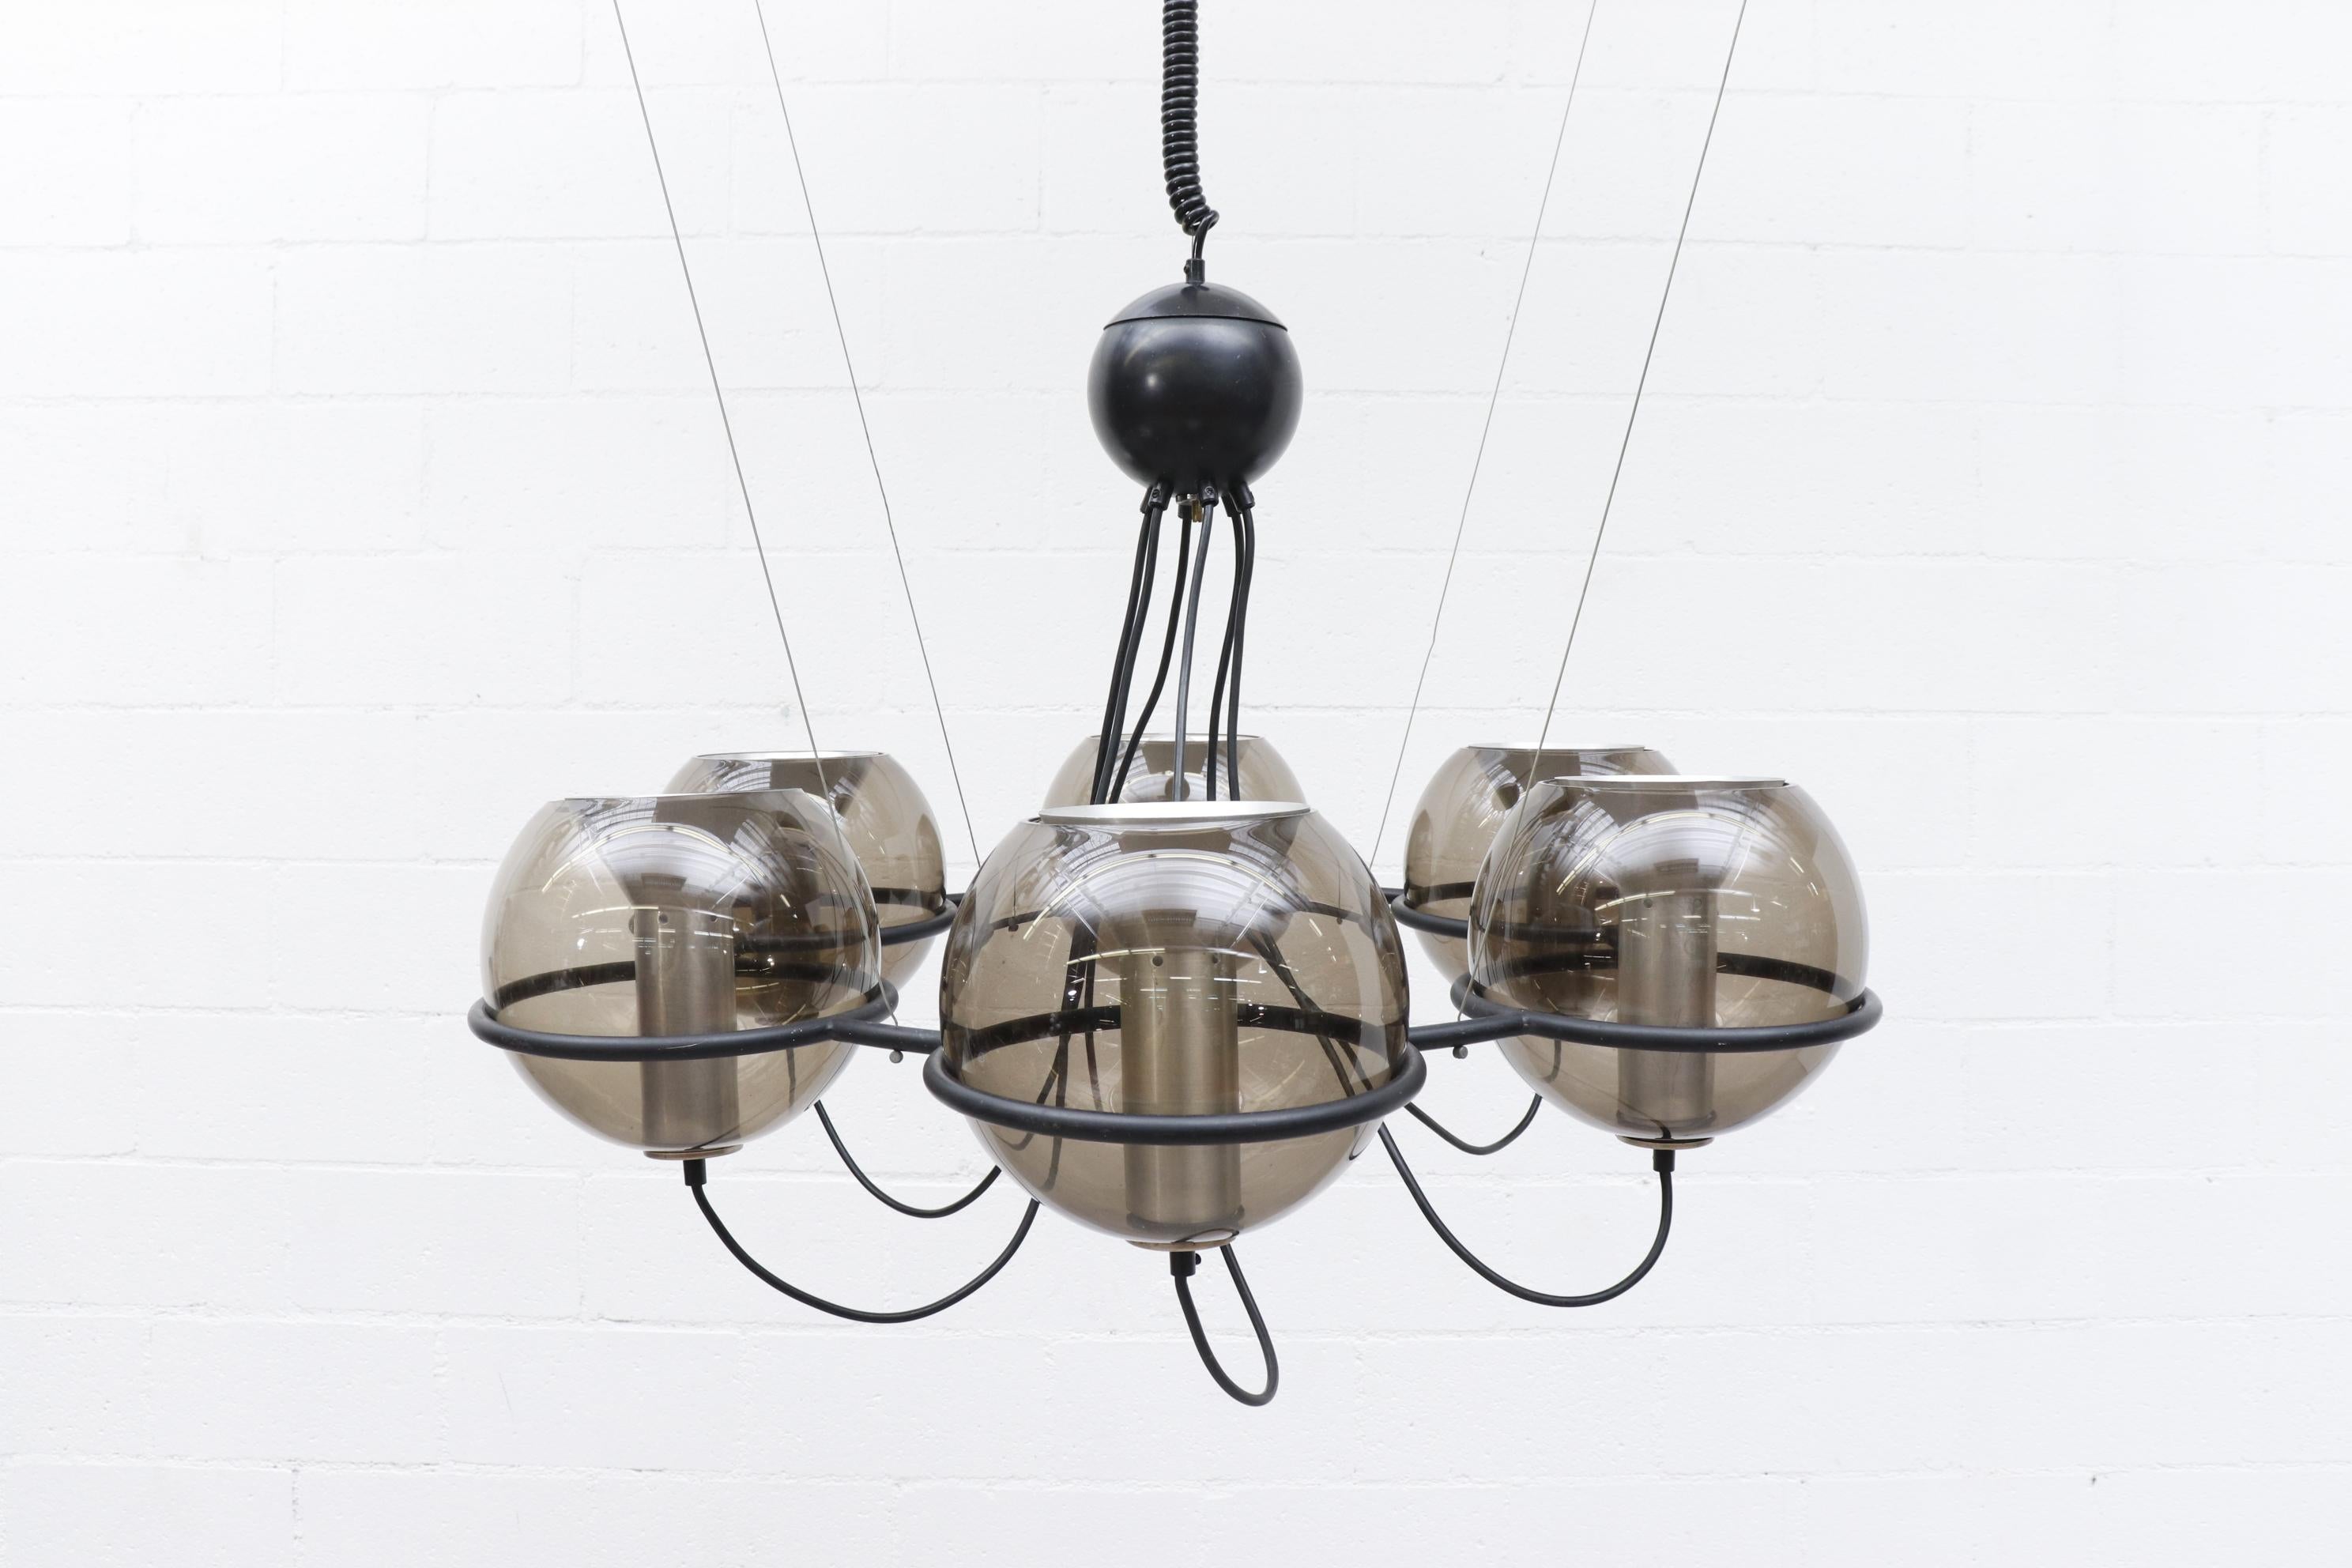 Midcentury RAAK  'Girandole' chandelier with six smoked blown glass globes on a black metal frame. Innovative at the time for showing exposed wiring and hardware. Shown in 2 possible configurations; 1) with spots pointing upward, and 2) as shown in